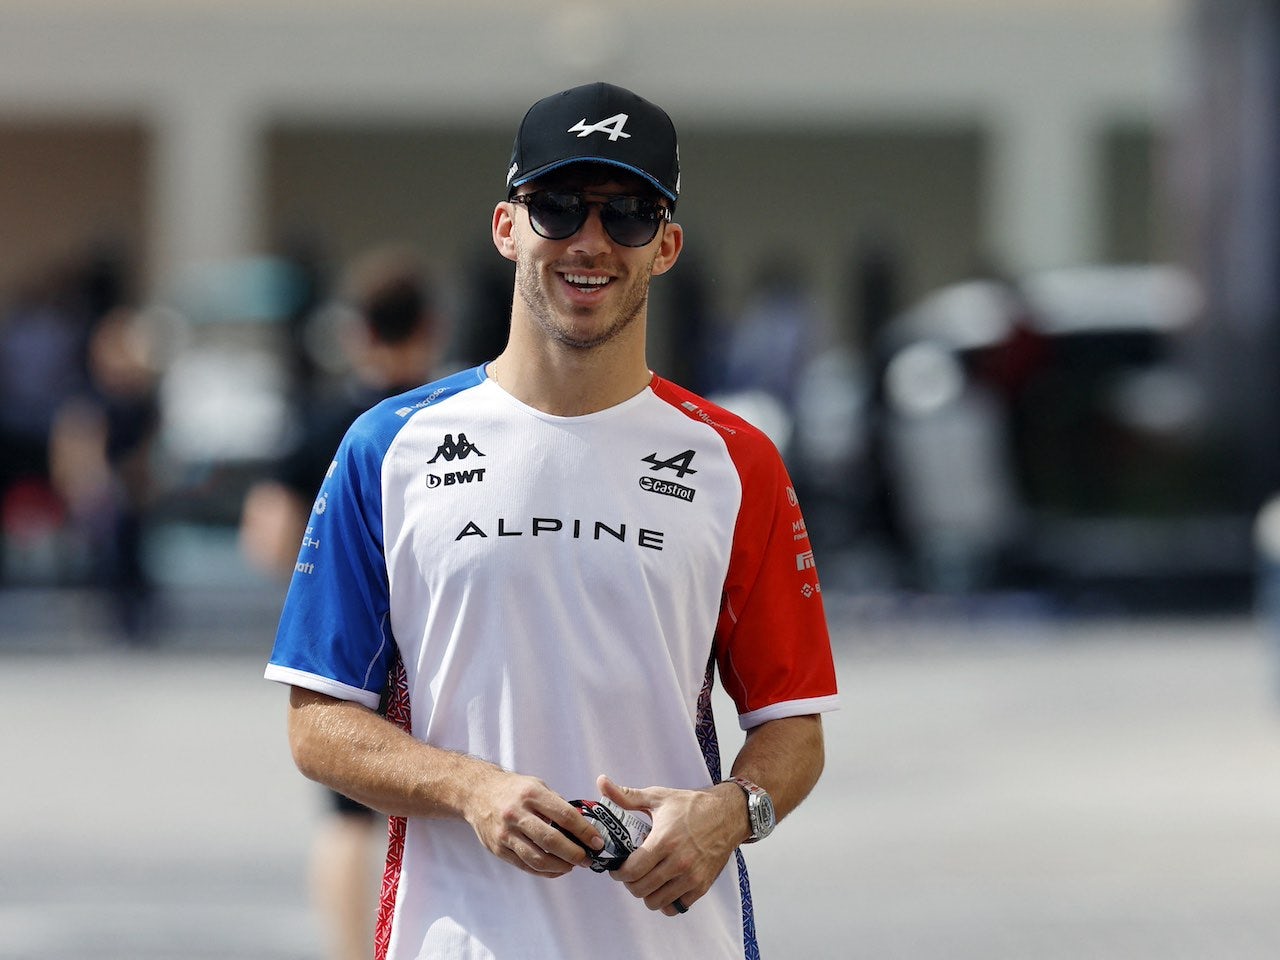 Gasly 'anticipated' qualifying dead last in Bahrain